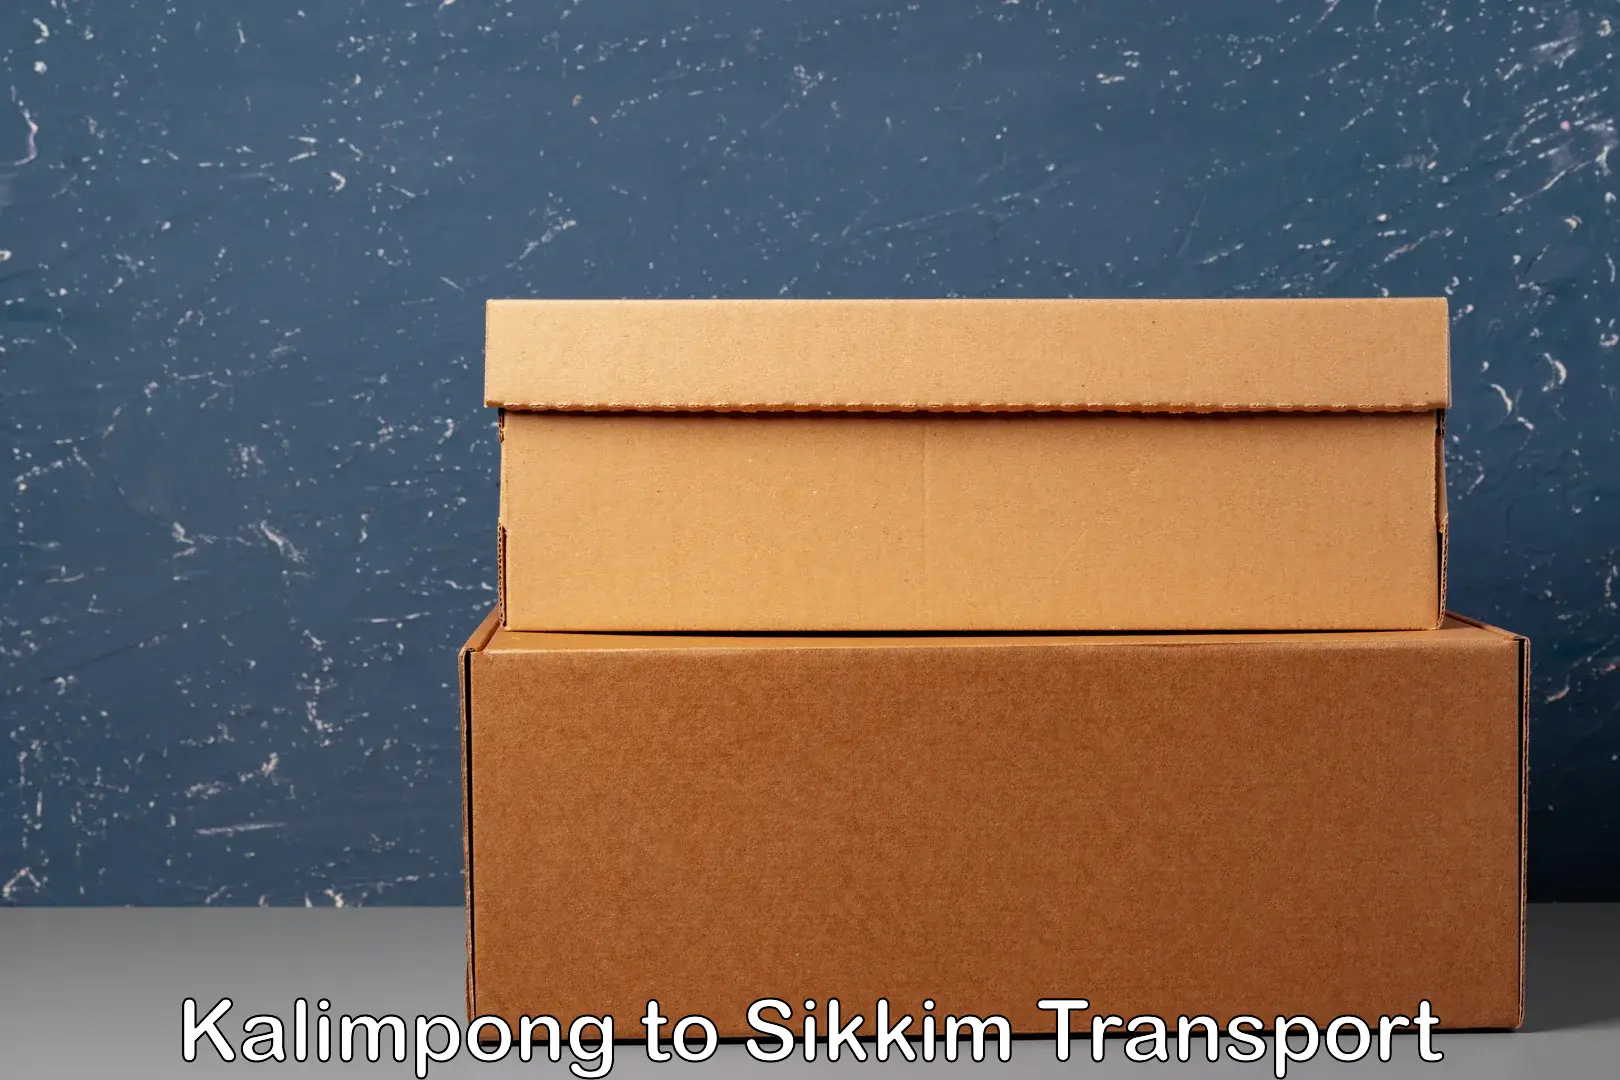 Online transport in Kalimpong to Sikkim